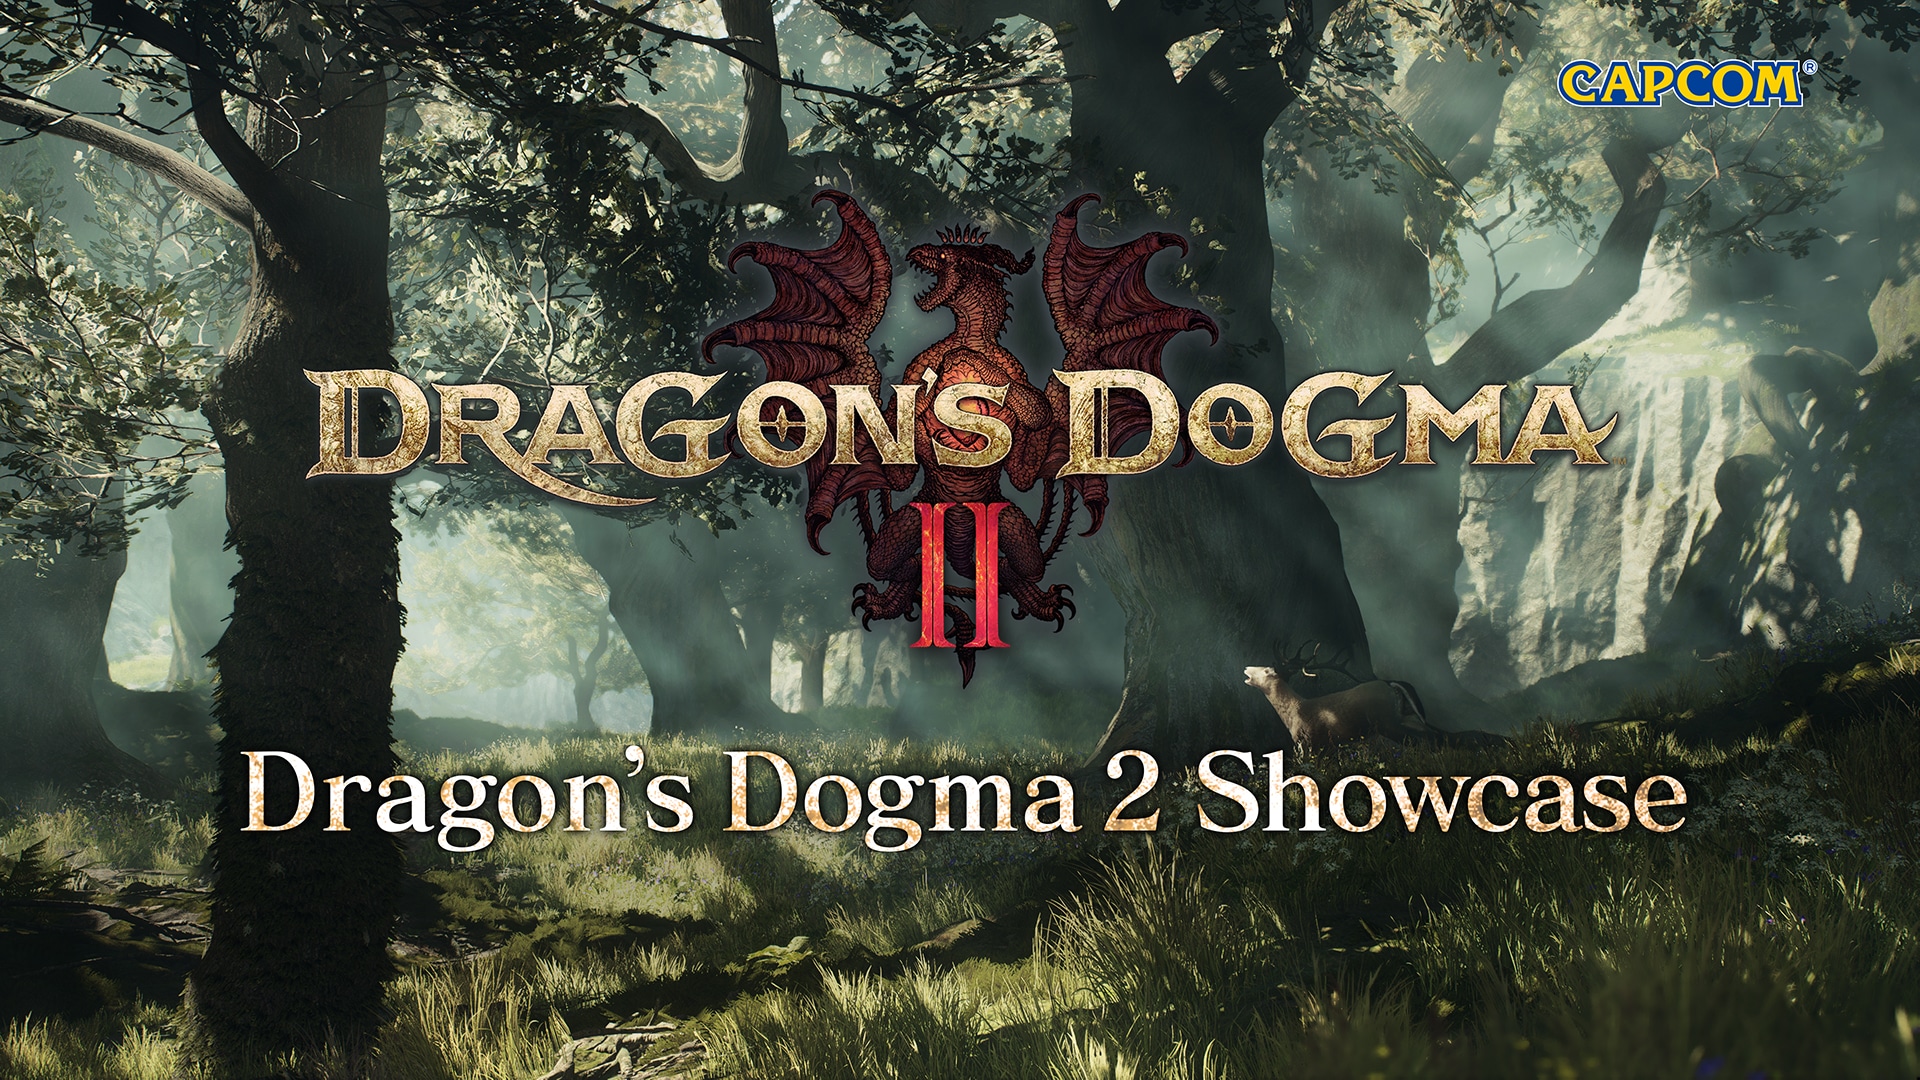 Dragon's Dogma 2 Steam Page Confirms Release Date Ahead of Planned